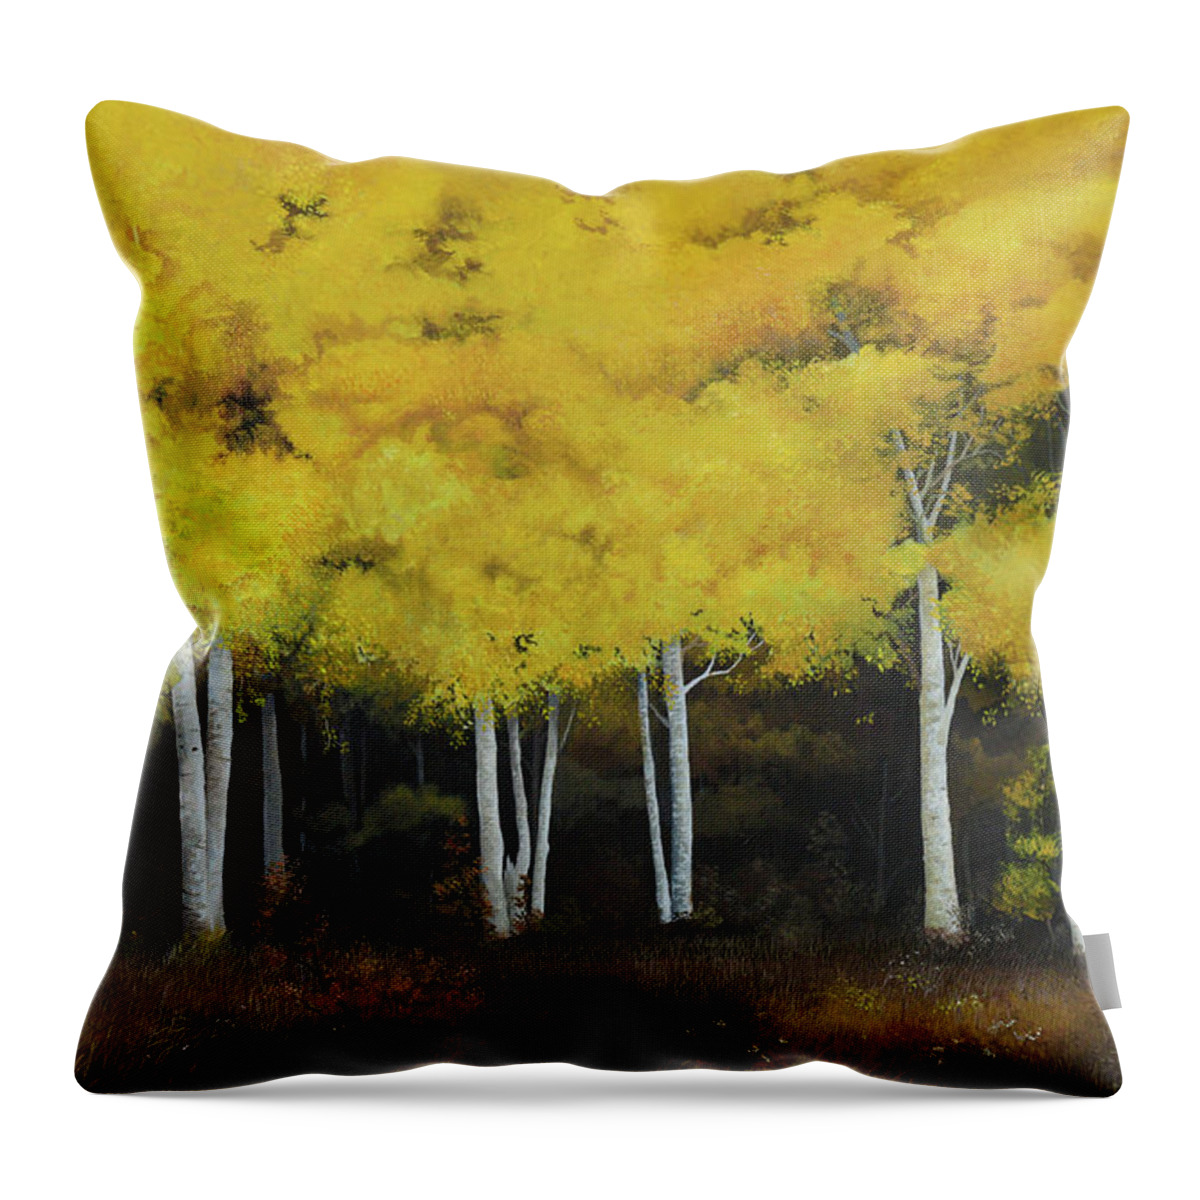 Birches Throw Pillow featuring the painting Birches by Charles Owens